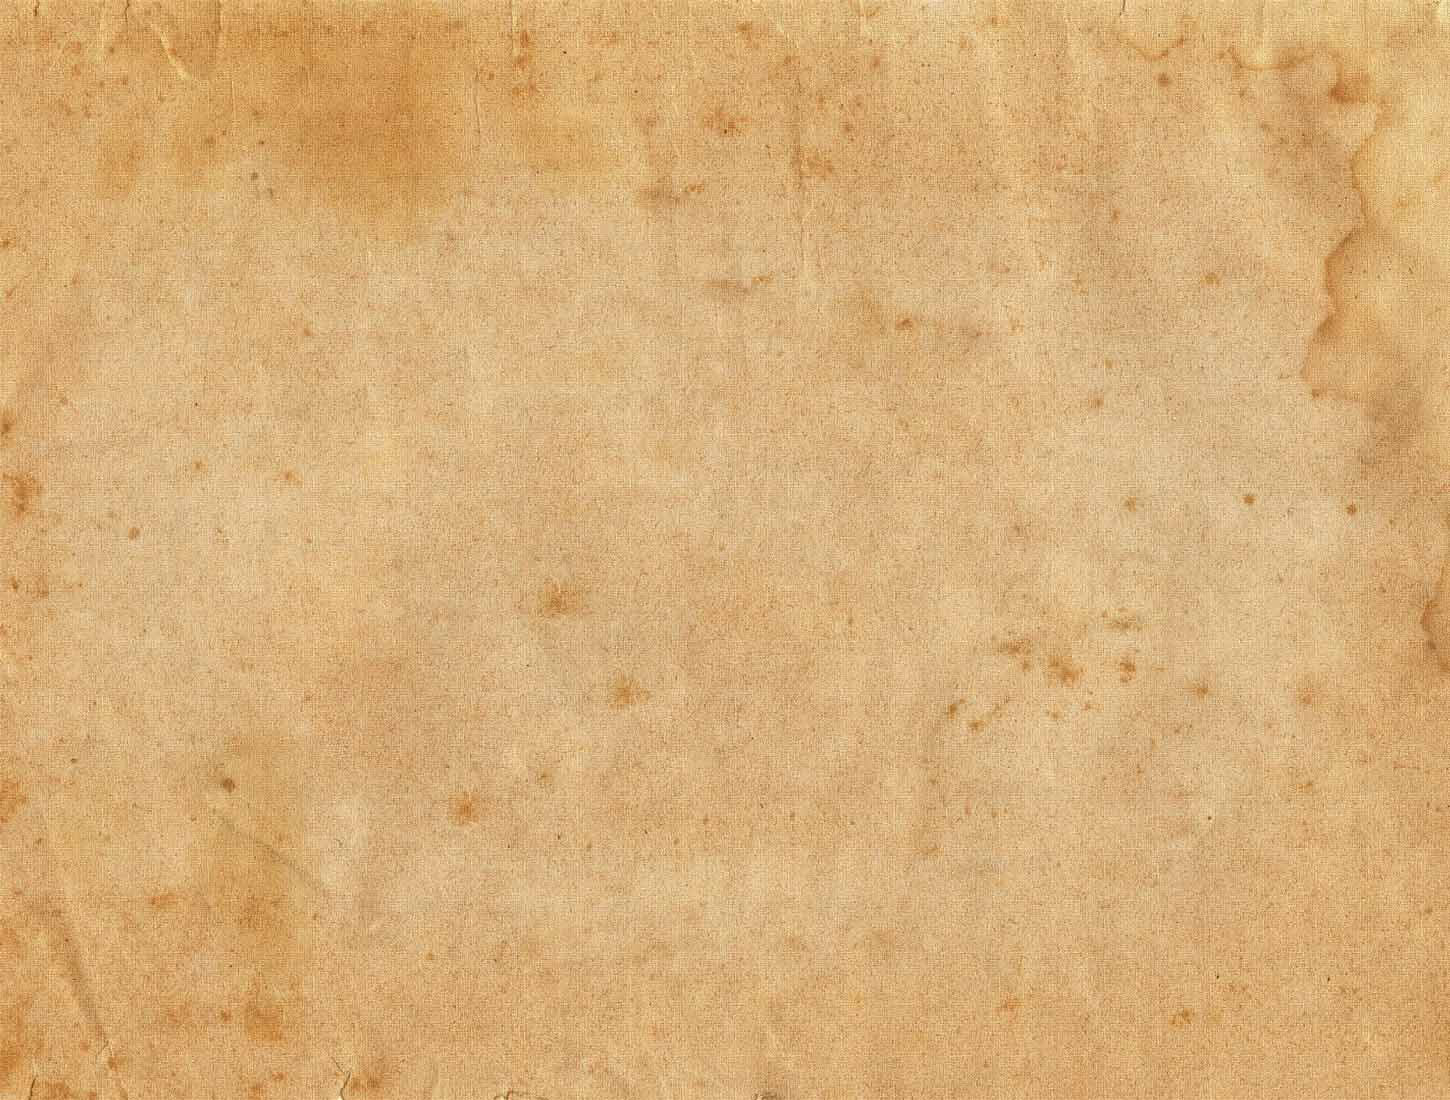 Old Beige Blank Paper Free Ppt Backgrounds For Your Inside Old Blank Newspaper Template